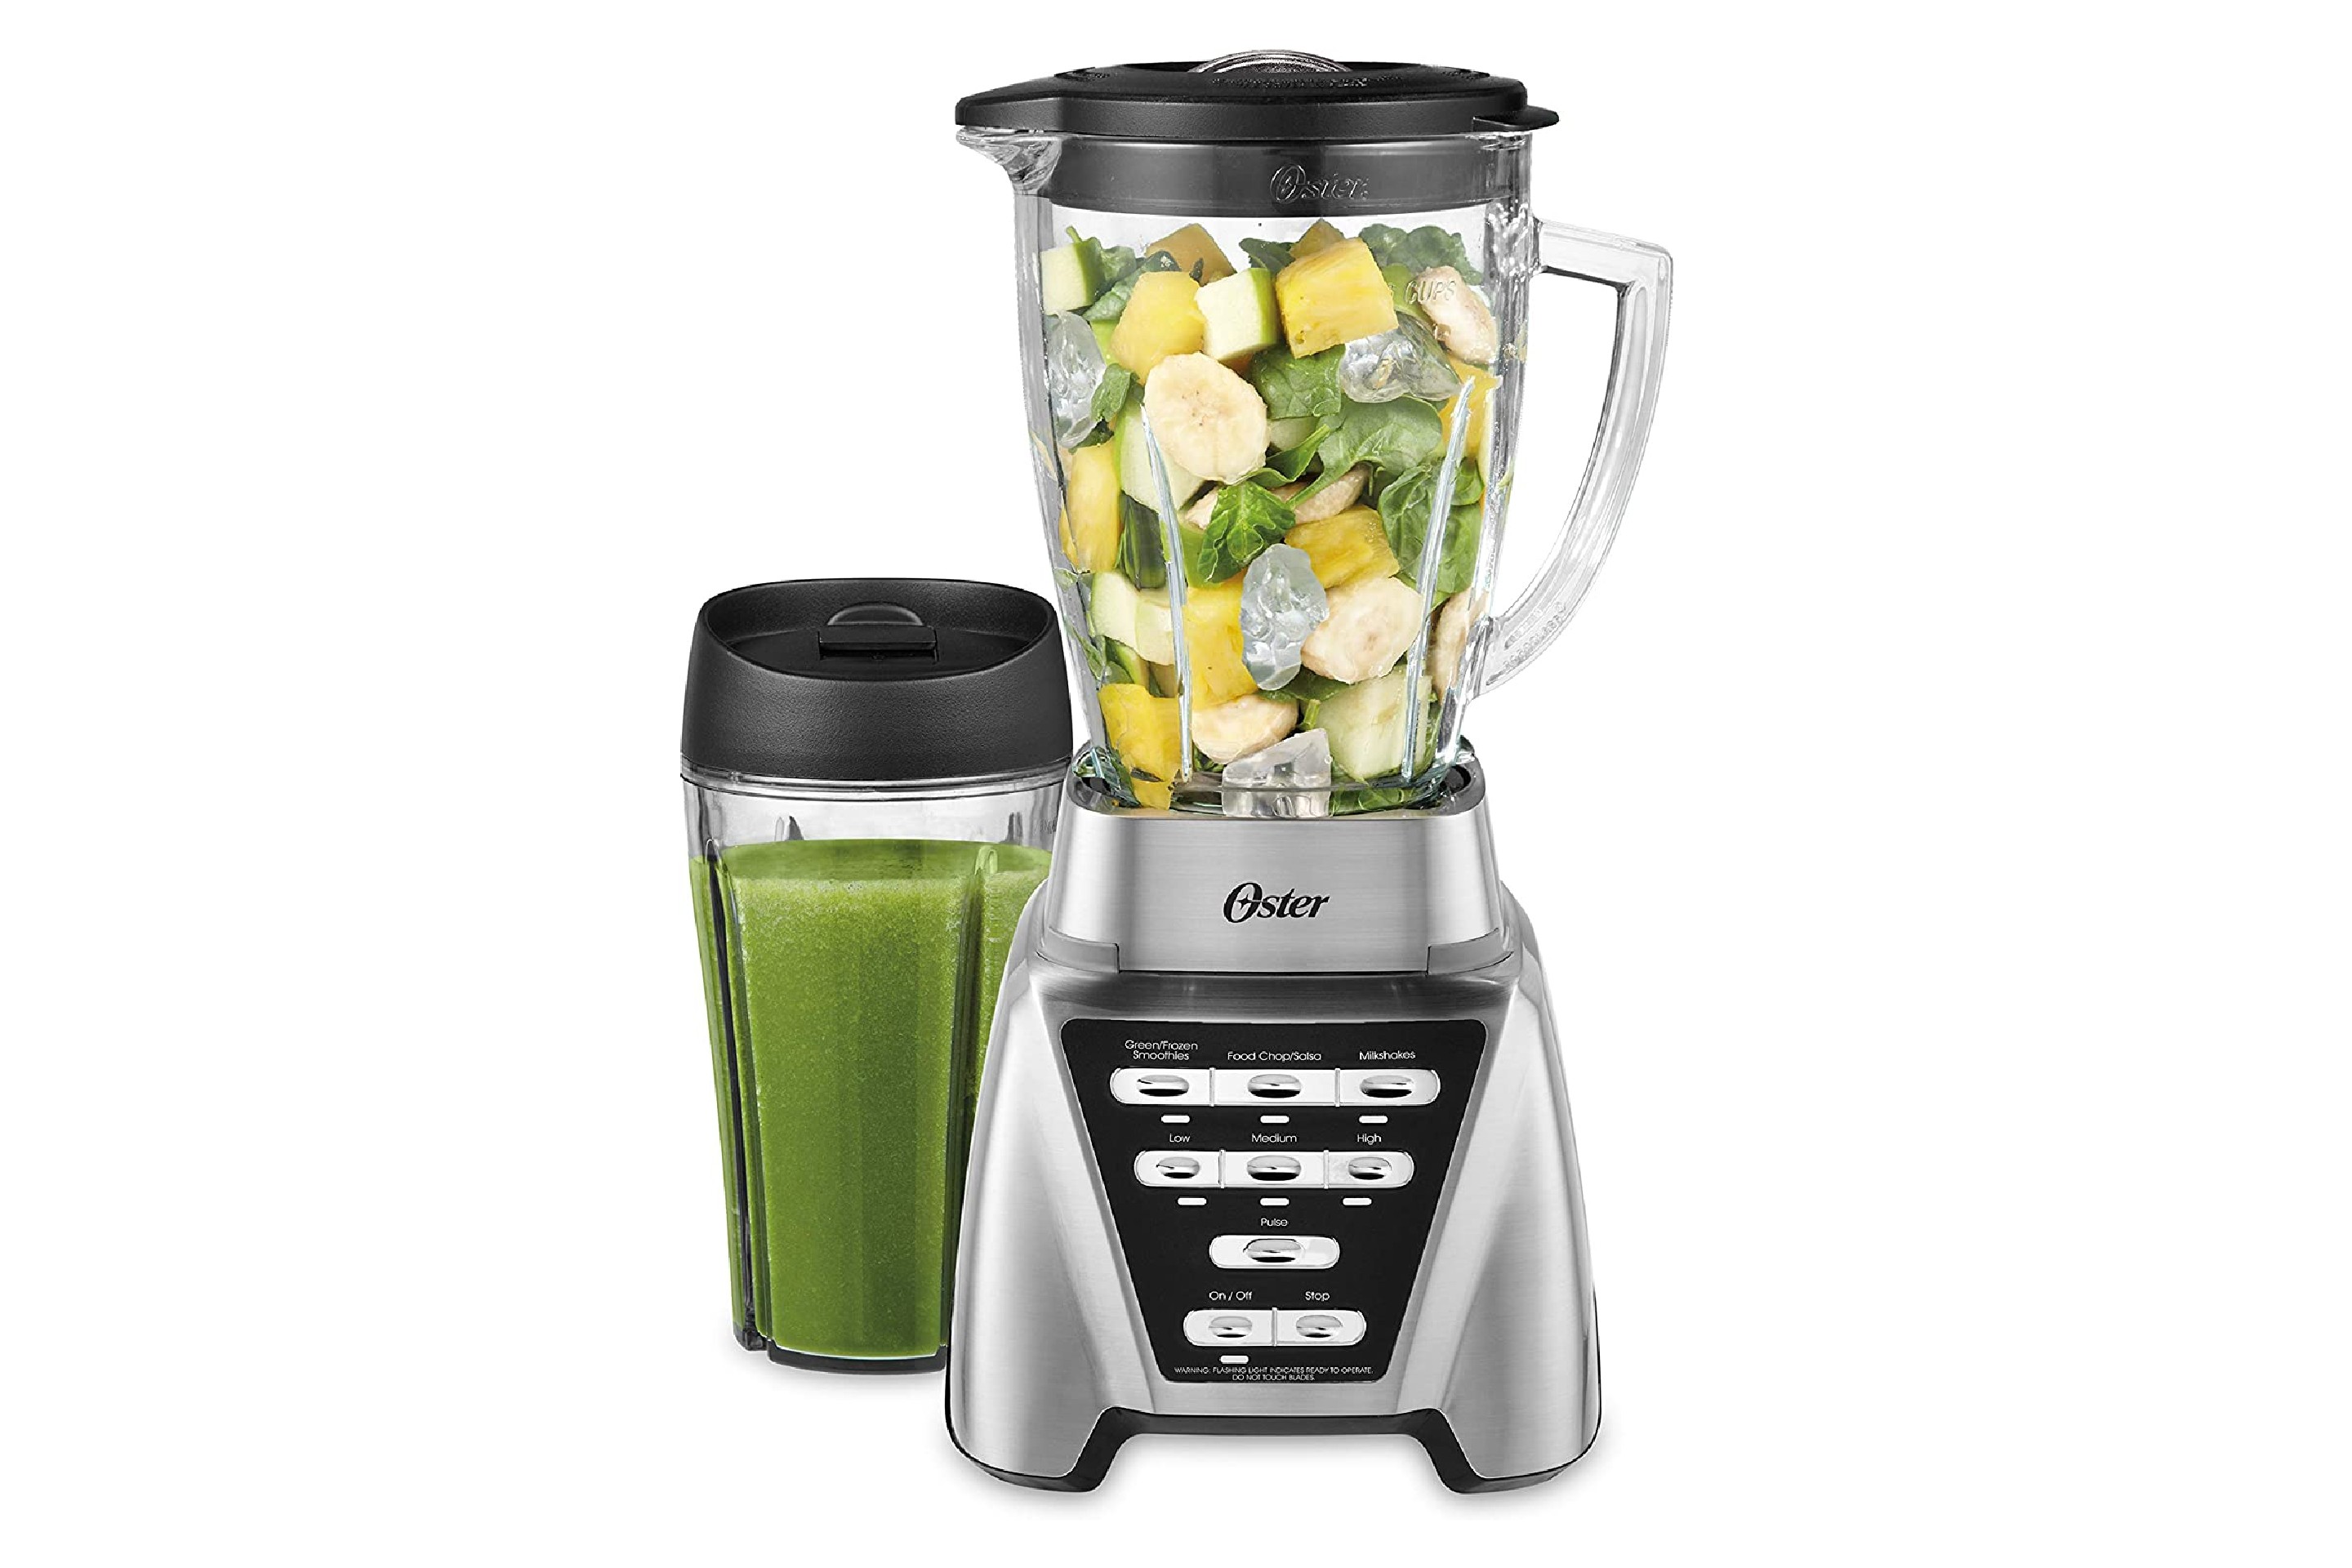 I Love This Counter-Friendly Blender, And Not Just Because It's